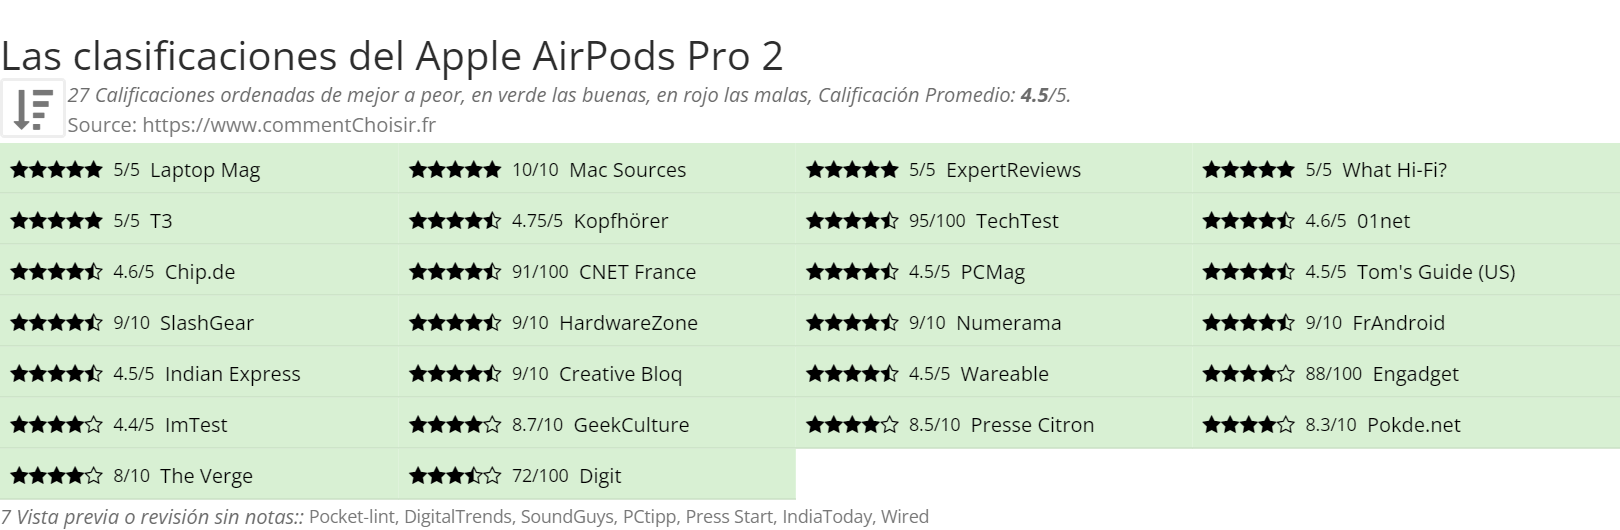 Ratings Apple AirPods Pro 2